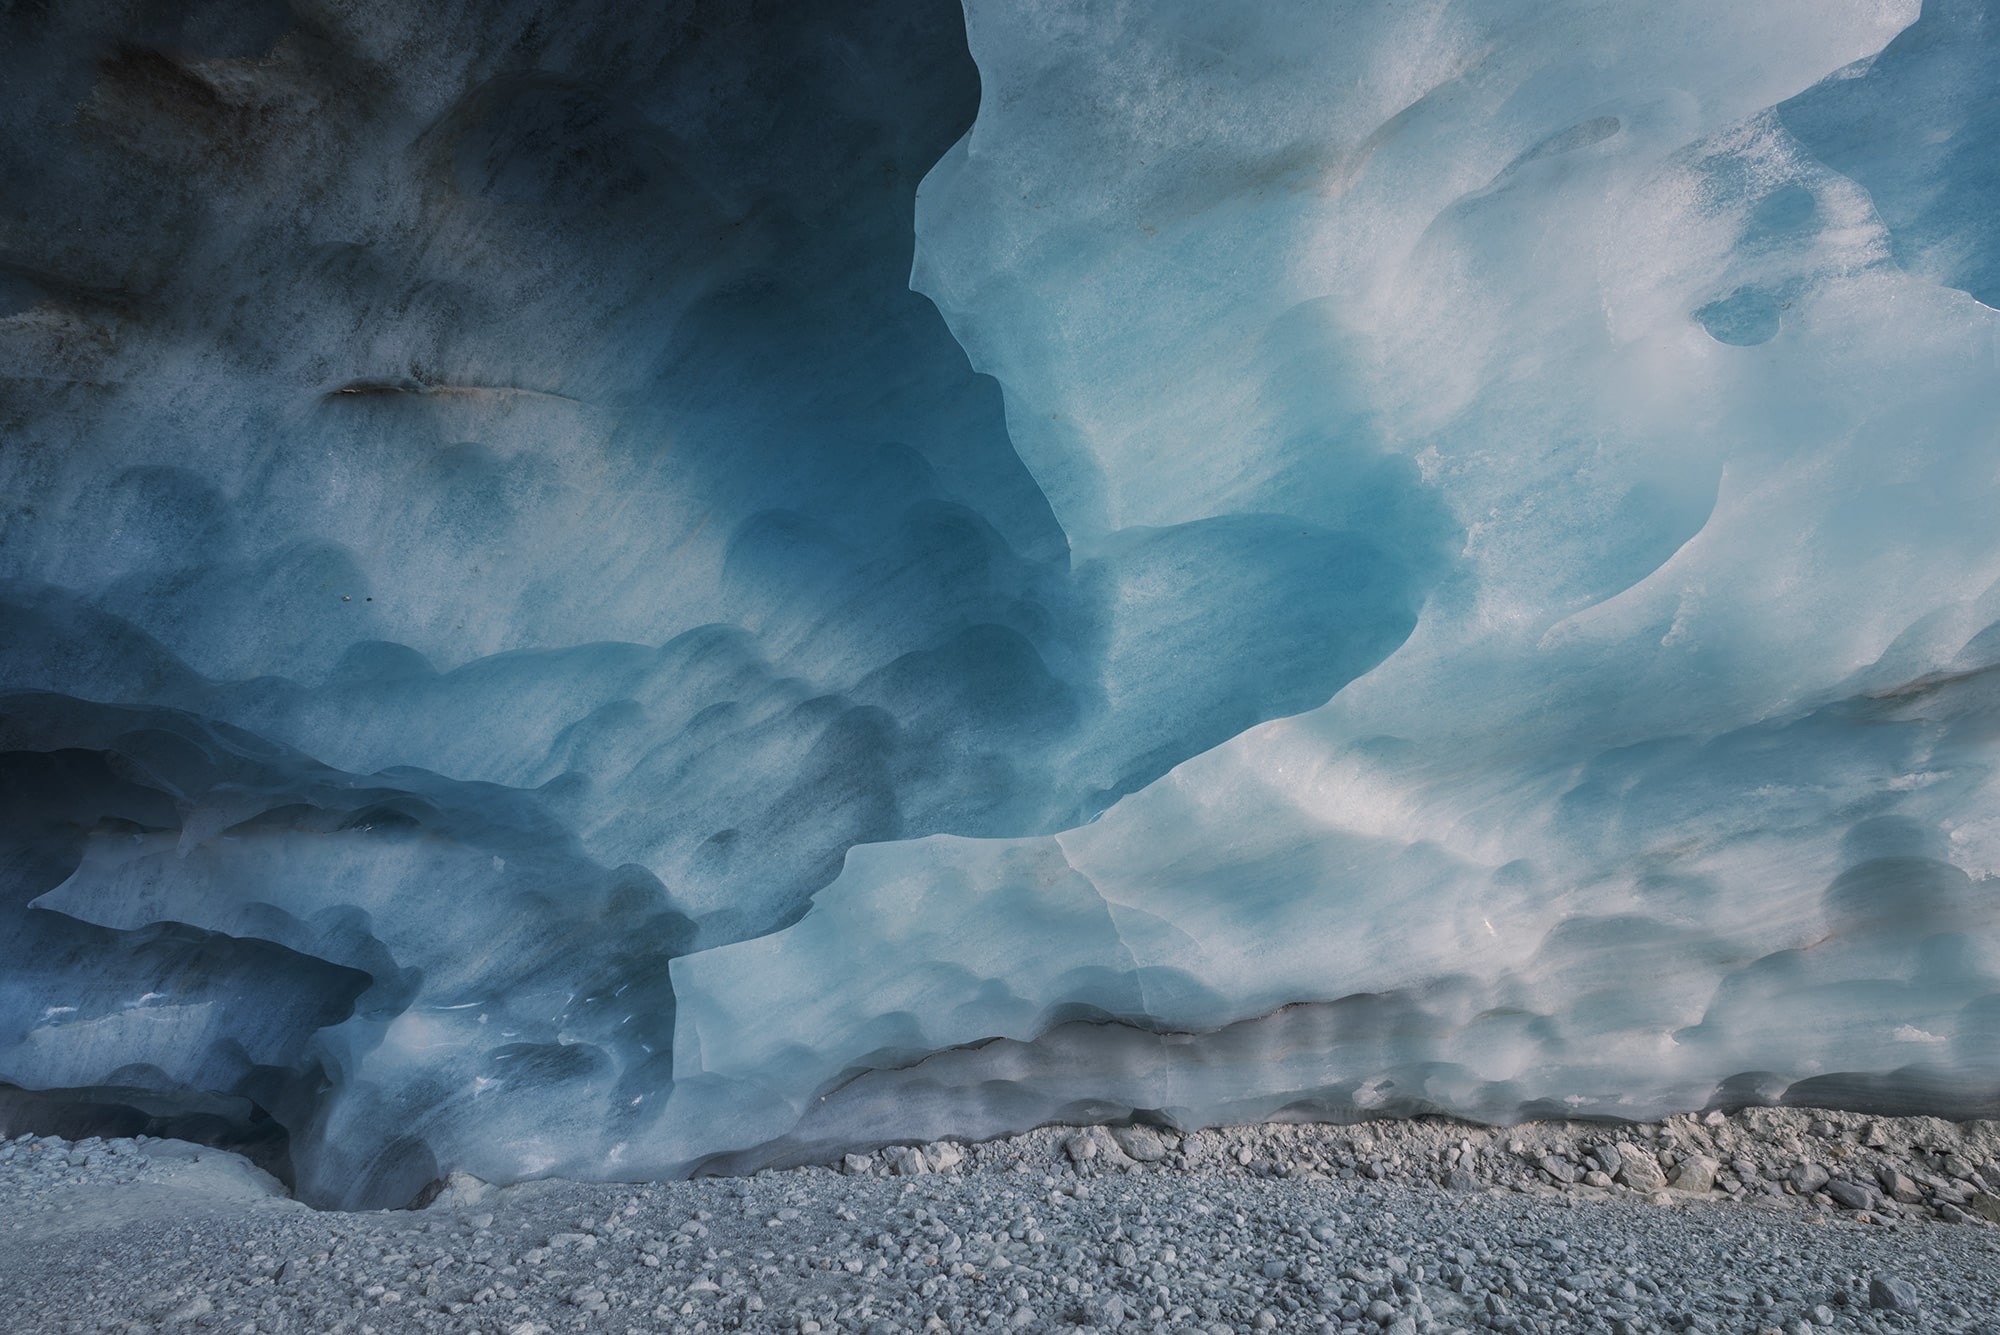 Experience the awe-inspiring beauty of the ice wall at Zinal Glacier Ice Cave, captured in stunning landscape photography. Located amidst the breathtaking Swiss Alps, this dramatic view showcases nature's grandeur at its finest. Expertly captured by photographer Jennifer Esseiva using her Nikon D810, this epic image invites you to immerse yourself in the majesty of Switzerland's icy landscapes.